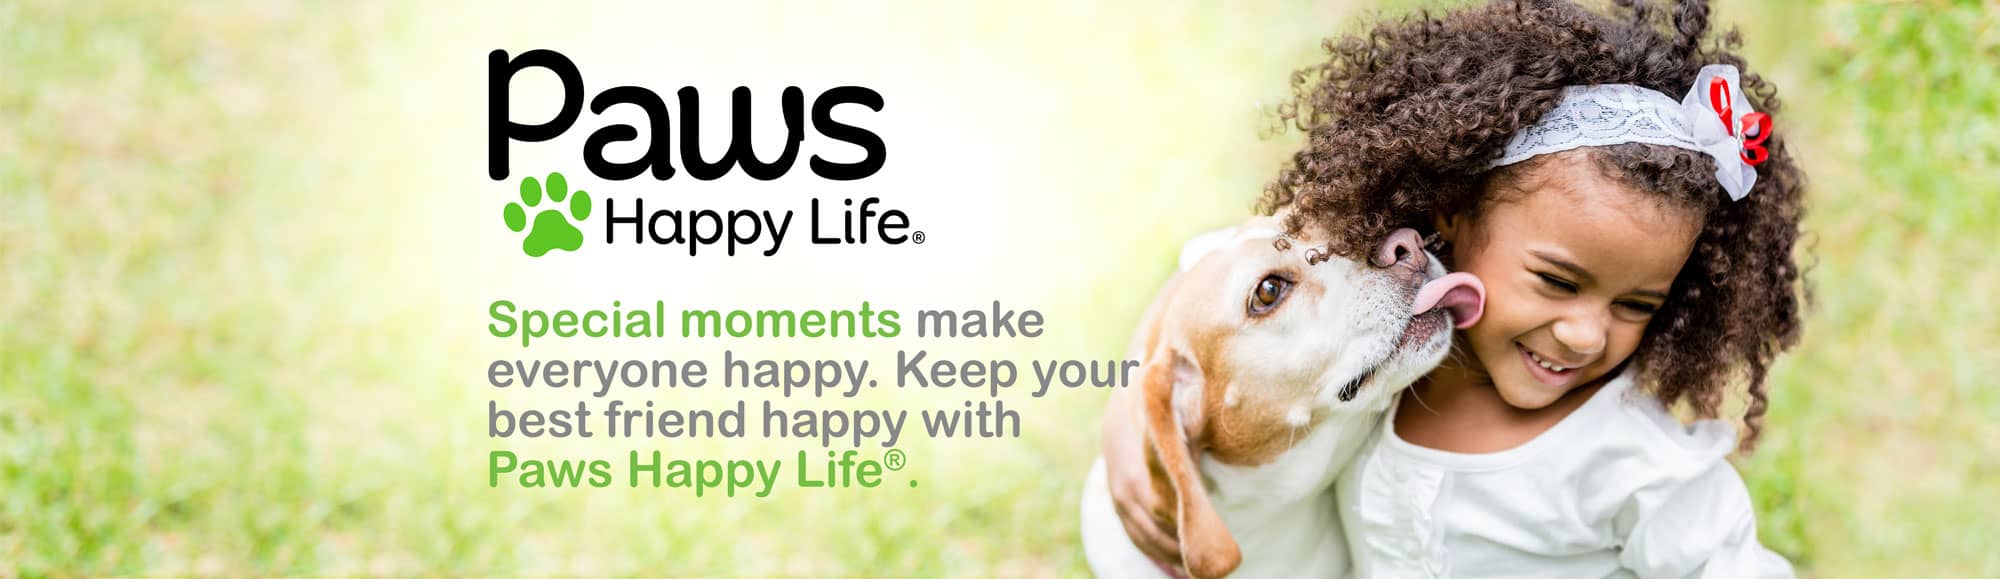 Special moments make everyone happy. Keep your best friends happy with Paws Happy Life.